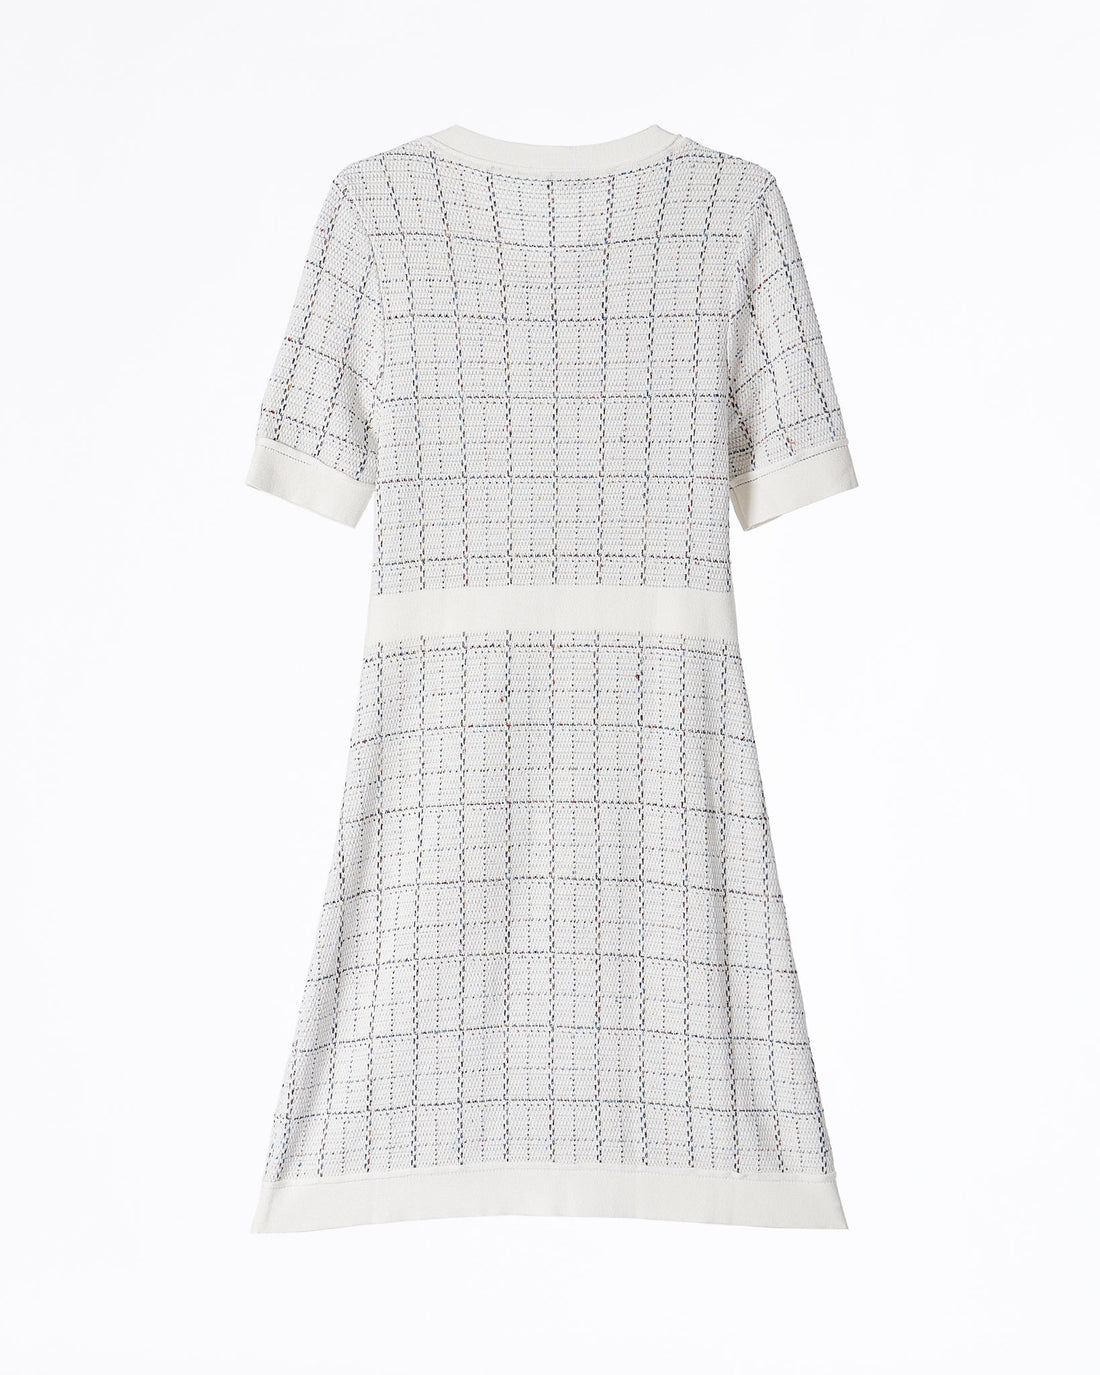 MOI OUTFIT-Tweed Lady White Dress 89.90